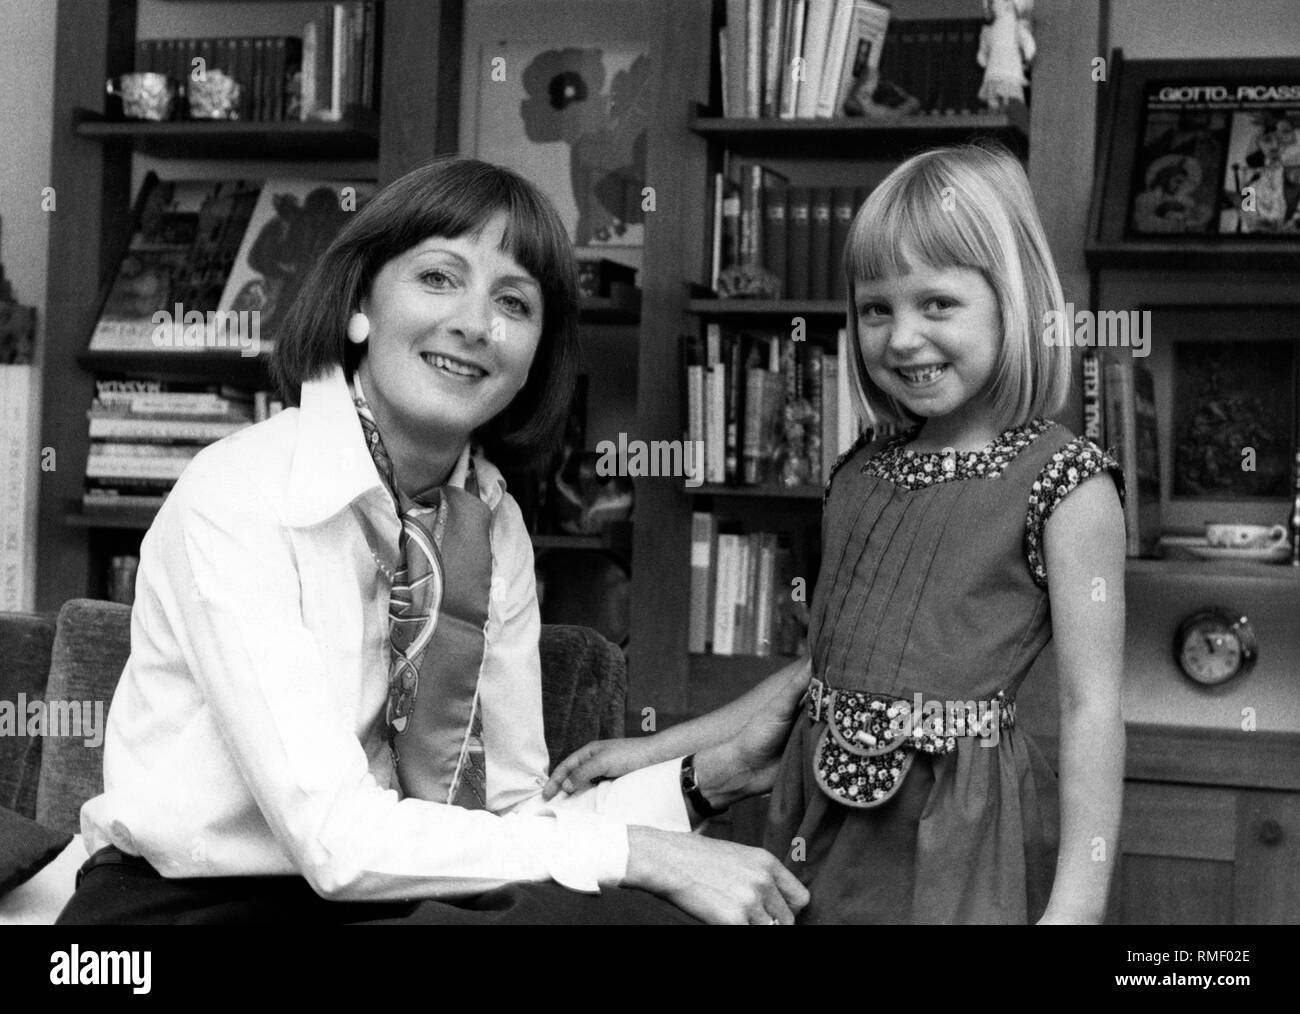 The Lord Mayor's wife Hildegard Kronawitter with her six-year-old daughter Isabelle (born 1971) in the Neuperlacher Haus. Stock Photo